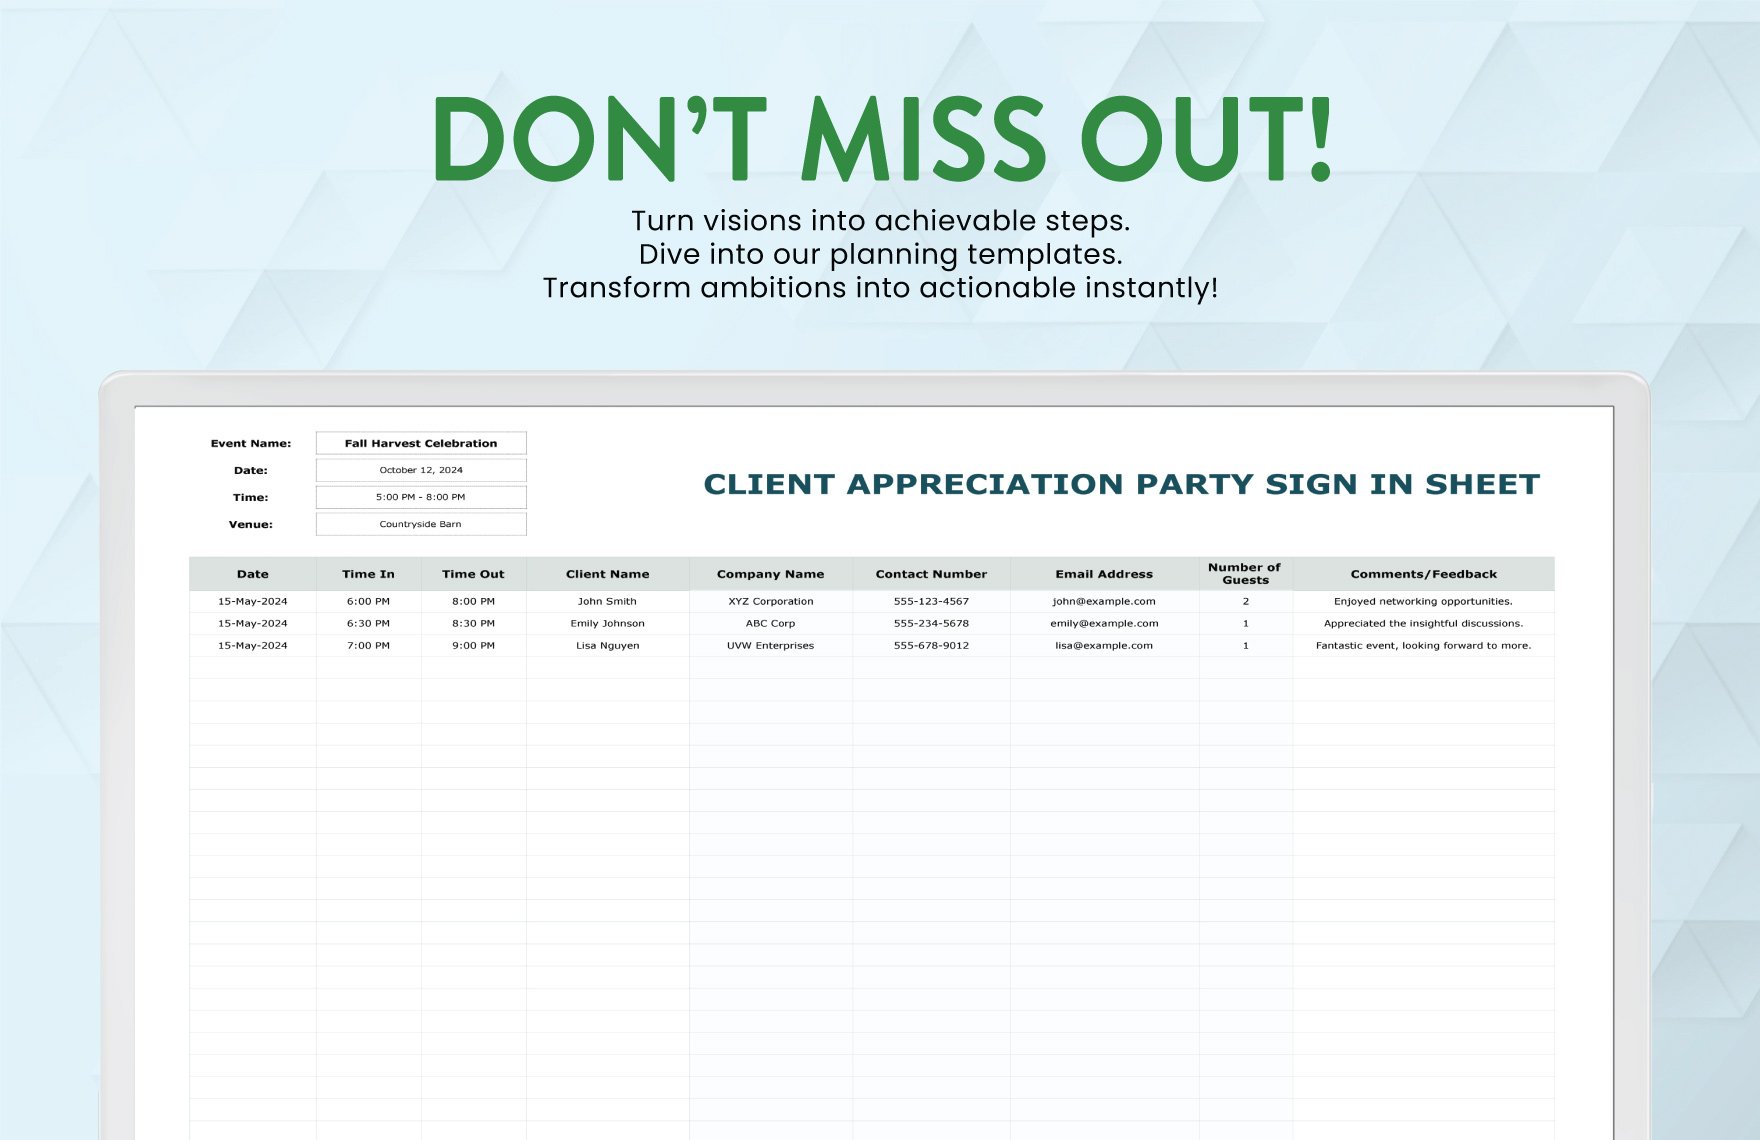 Client Appreciation Party Sign in Sheet Template